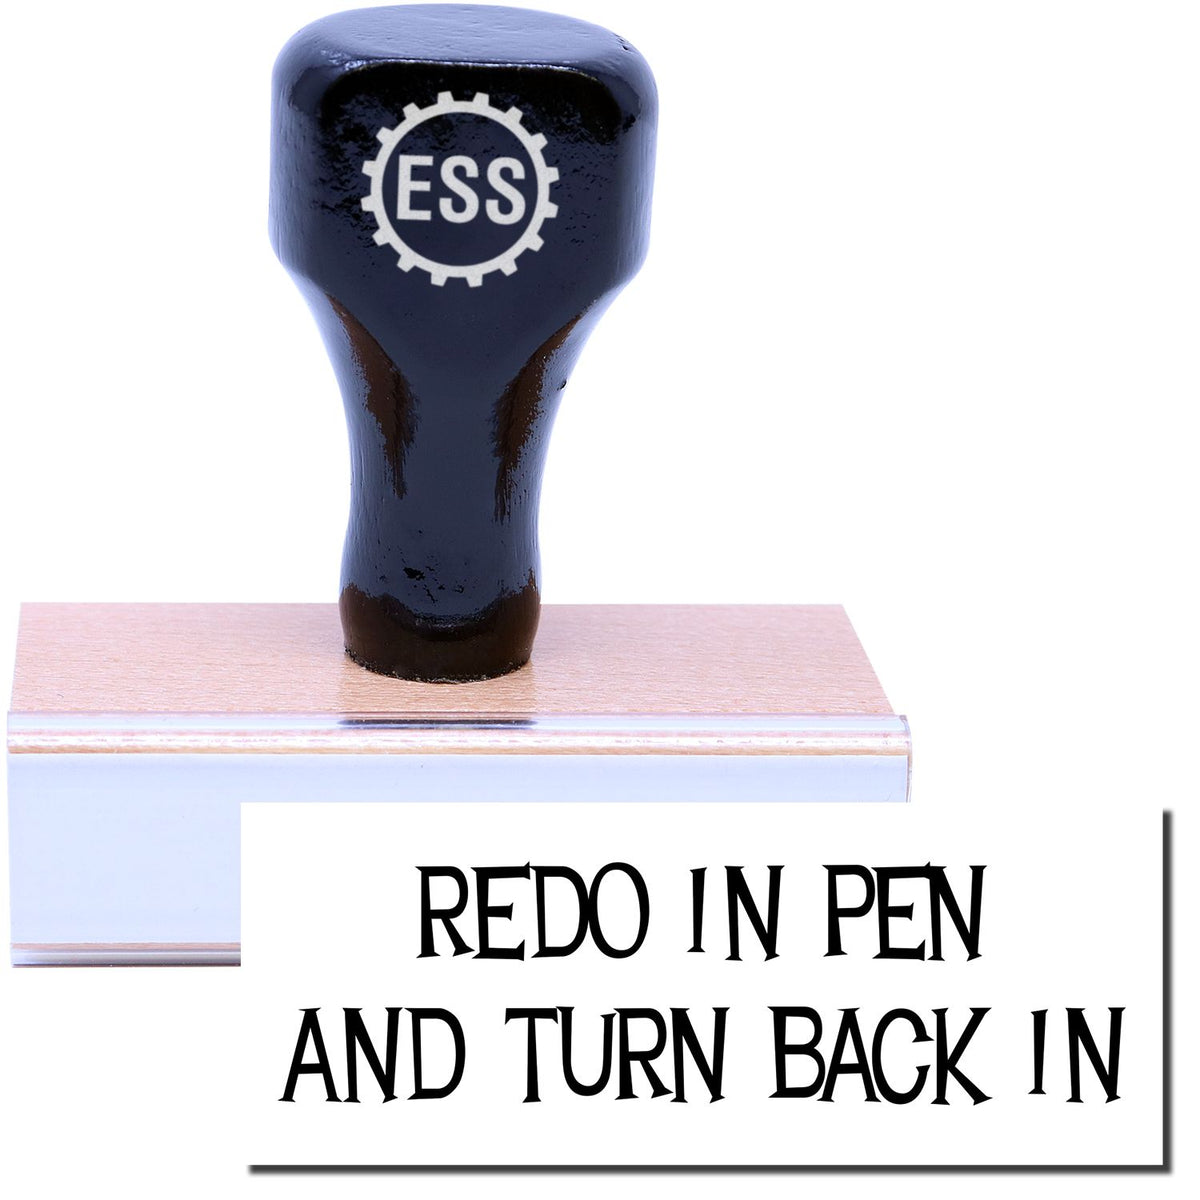 A stock office rubber stamp with a stamped image showing how the text &quot;REDO IN PEN AND TURN BACK IN&quot; in a large font is displayed after stamping.